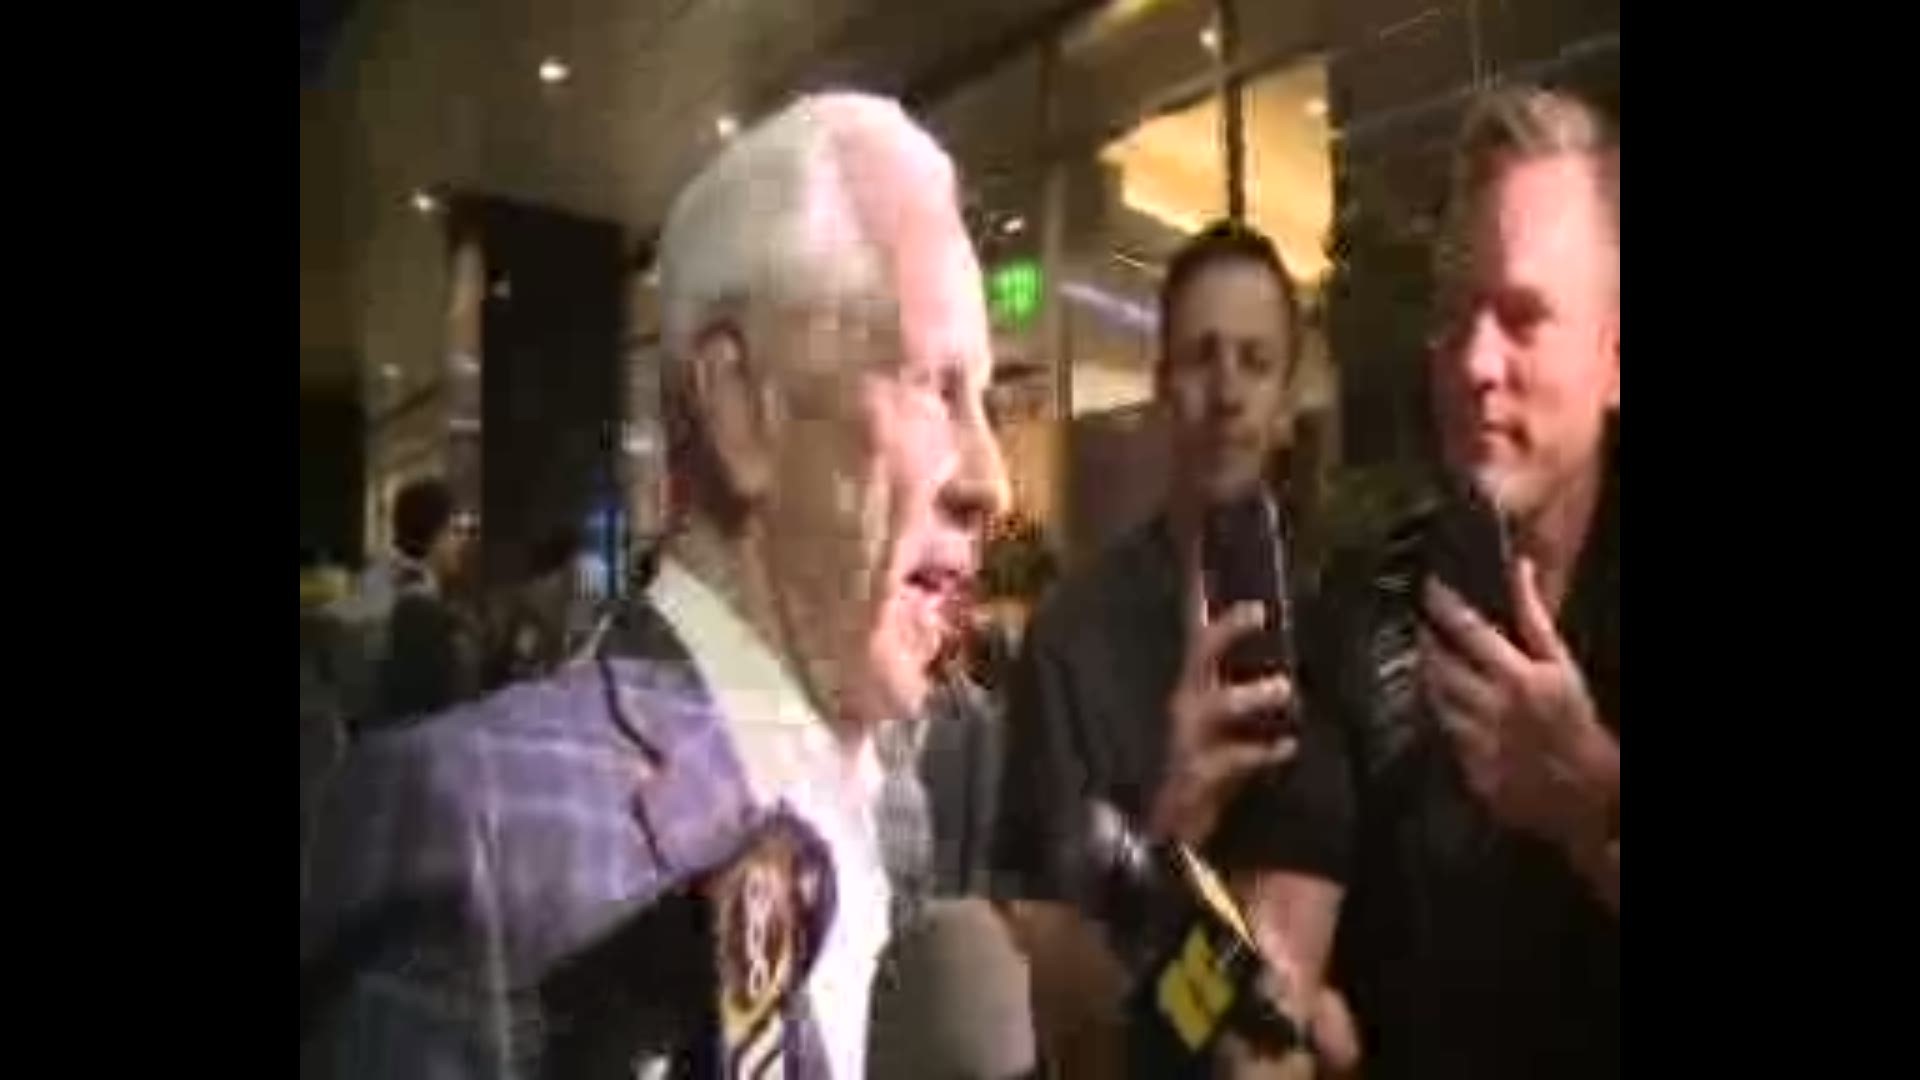 North Carolina coach Roy Williams addressed the media after arriving at the team's hotel in Phoenix Tuesday night.